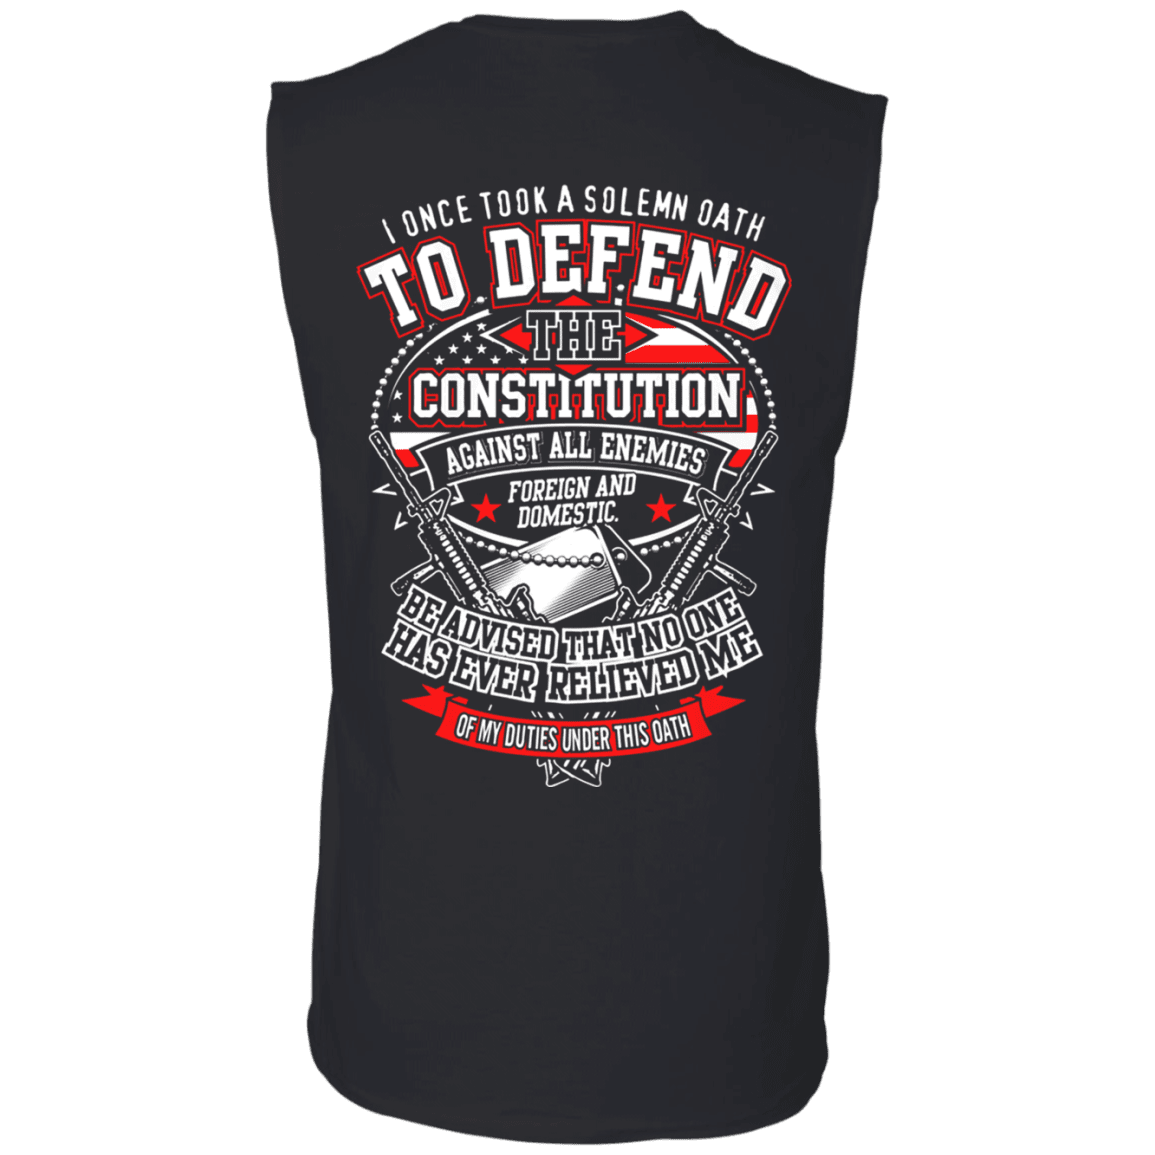 Military T-Shirt "I Once Tool A Solemn Oath to Defend The Constitution" Men Back-TShirt-General-Veterans Nation